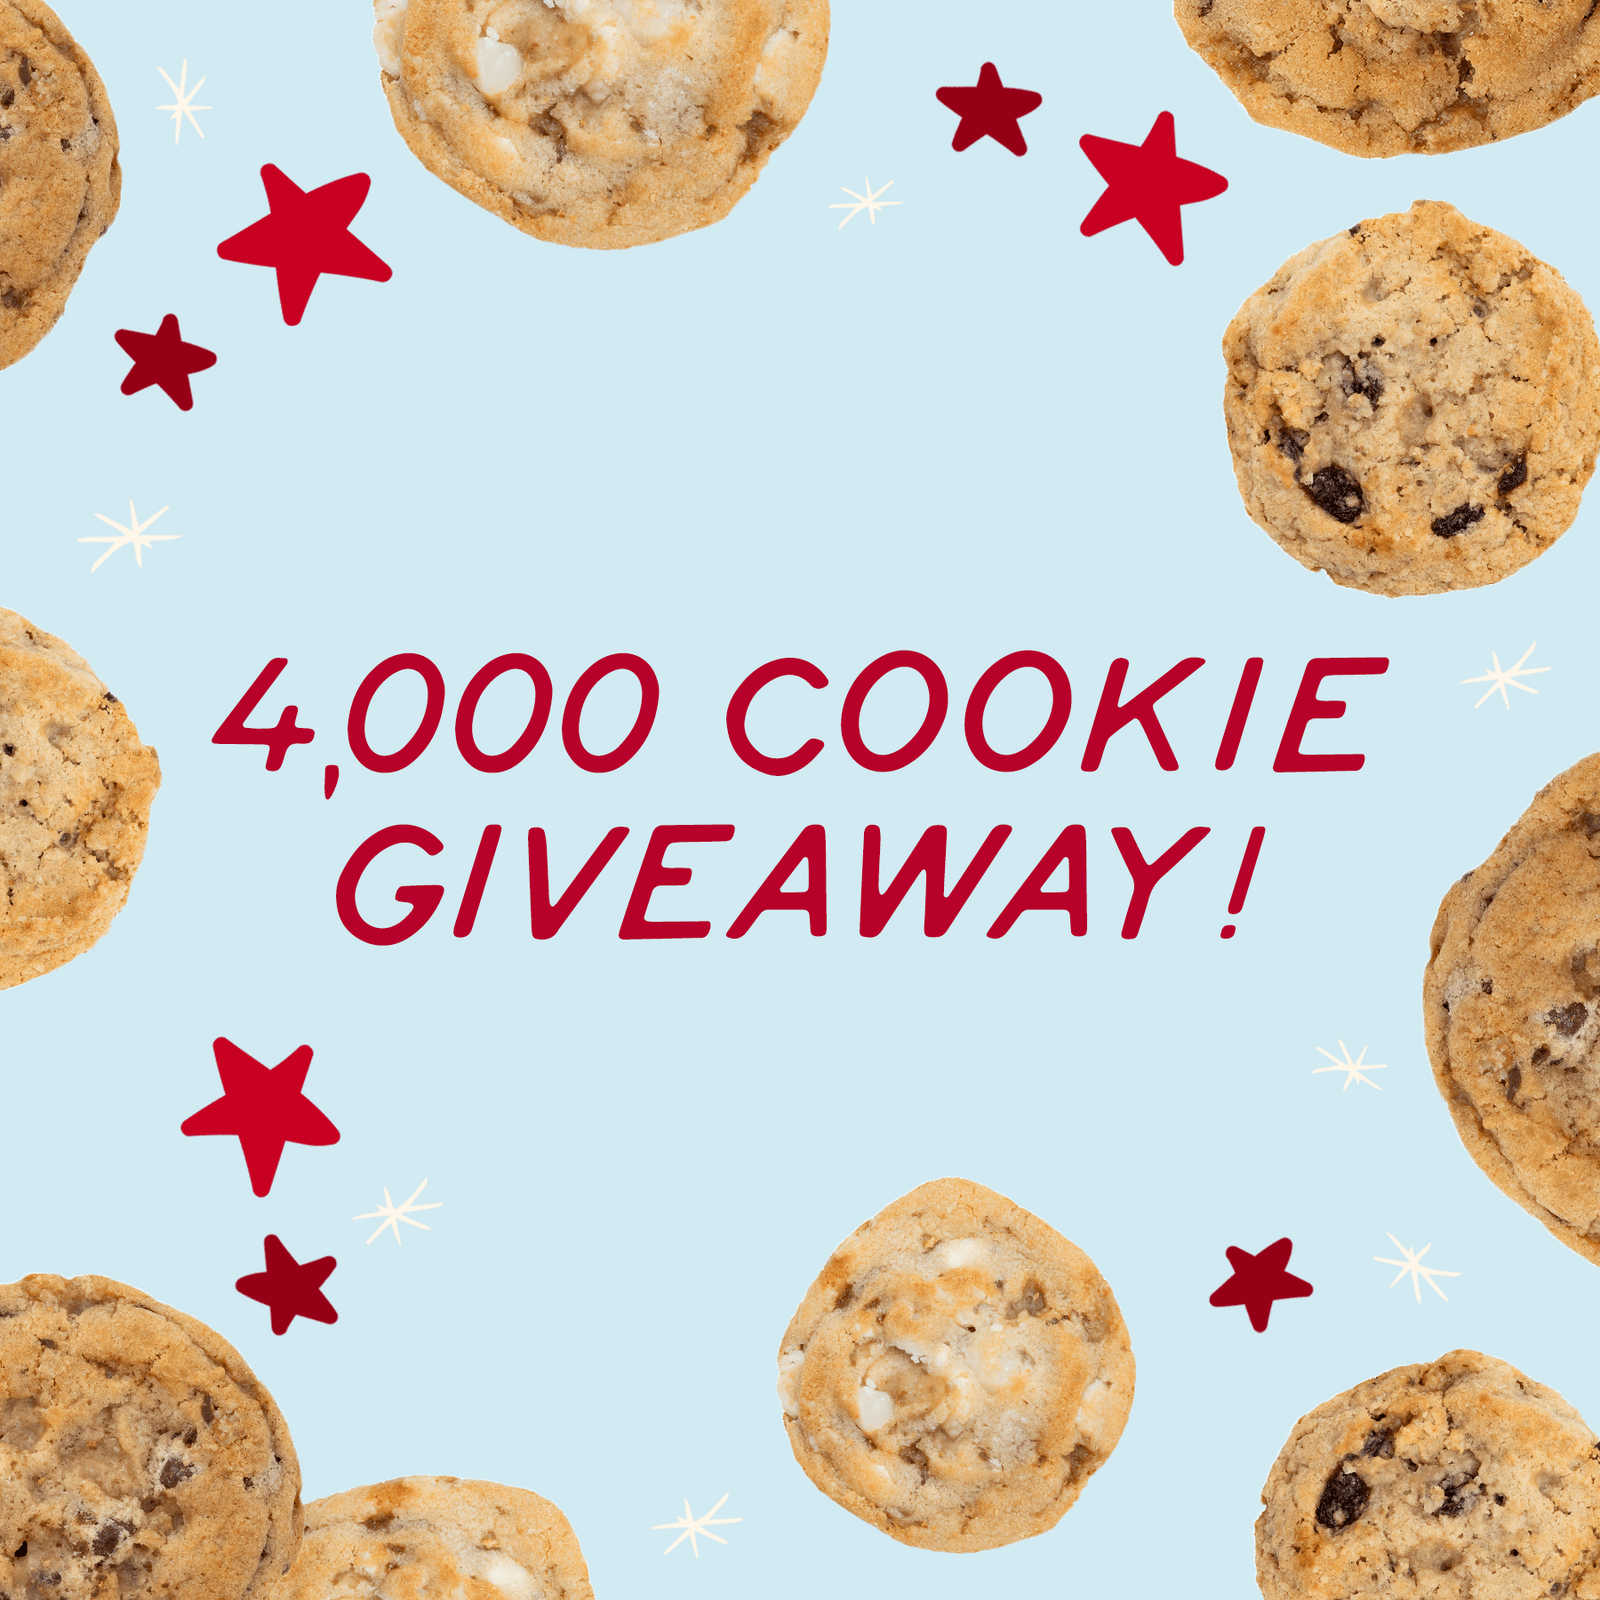 FREE Cookie from Christie Cookies with Free Shipping (FIRST 4,000!)